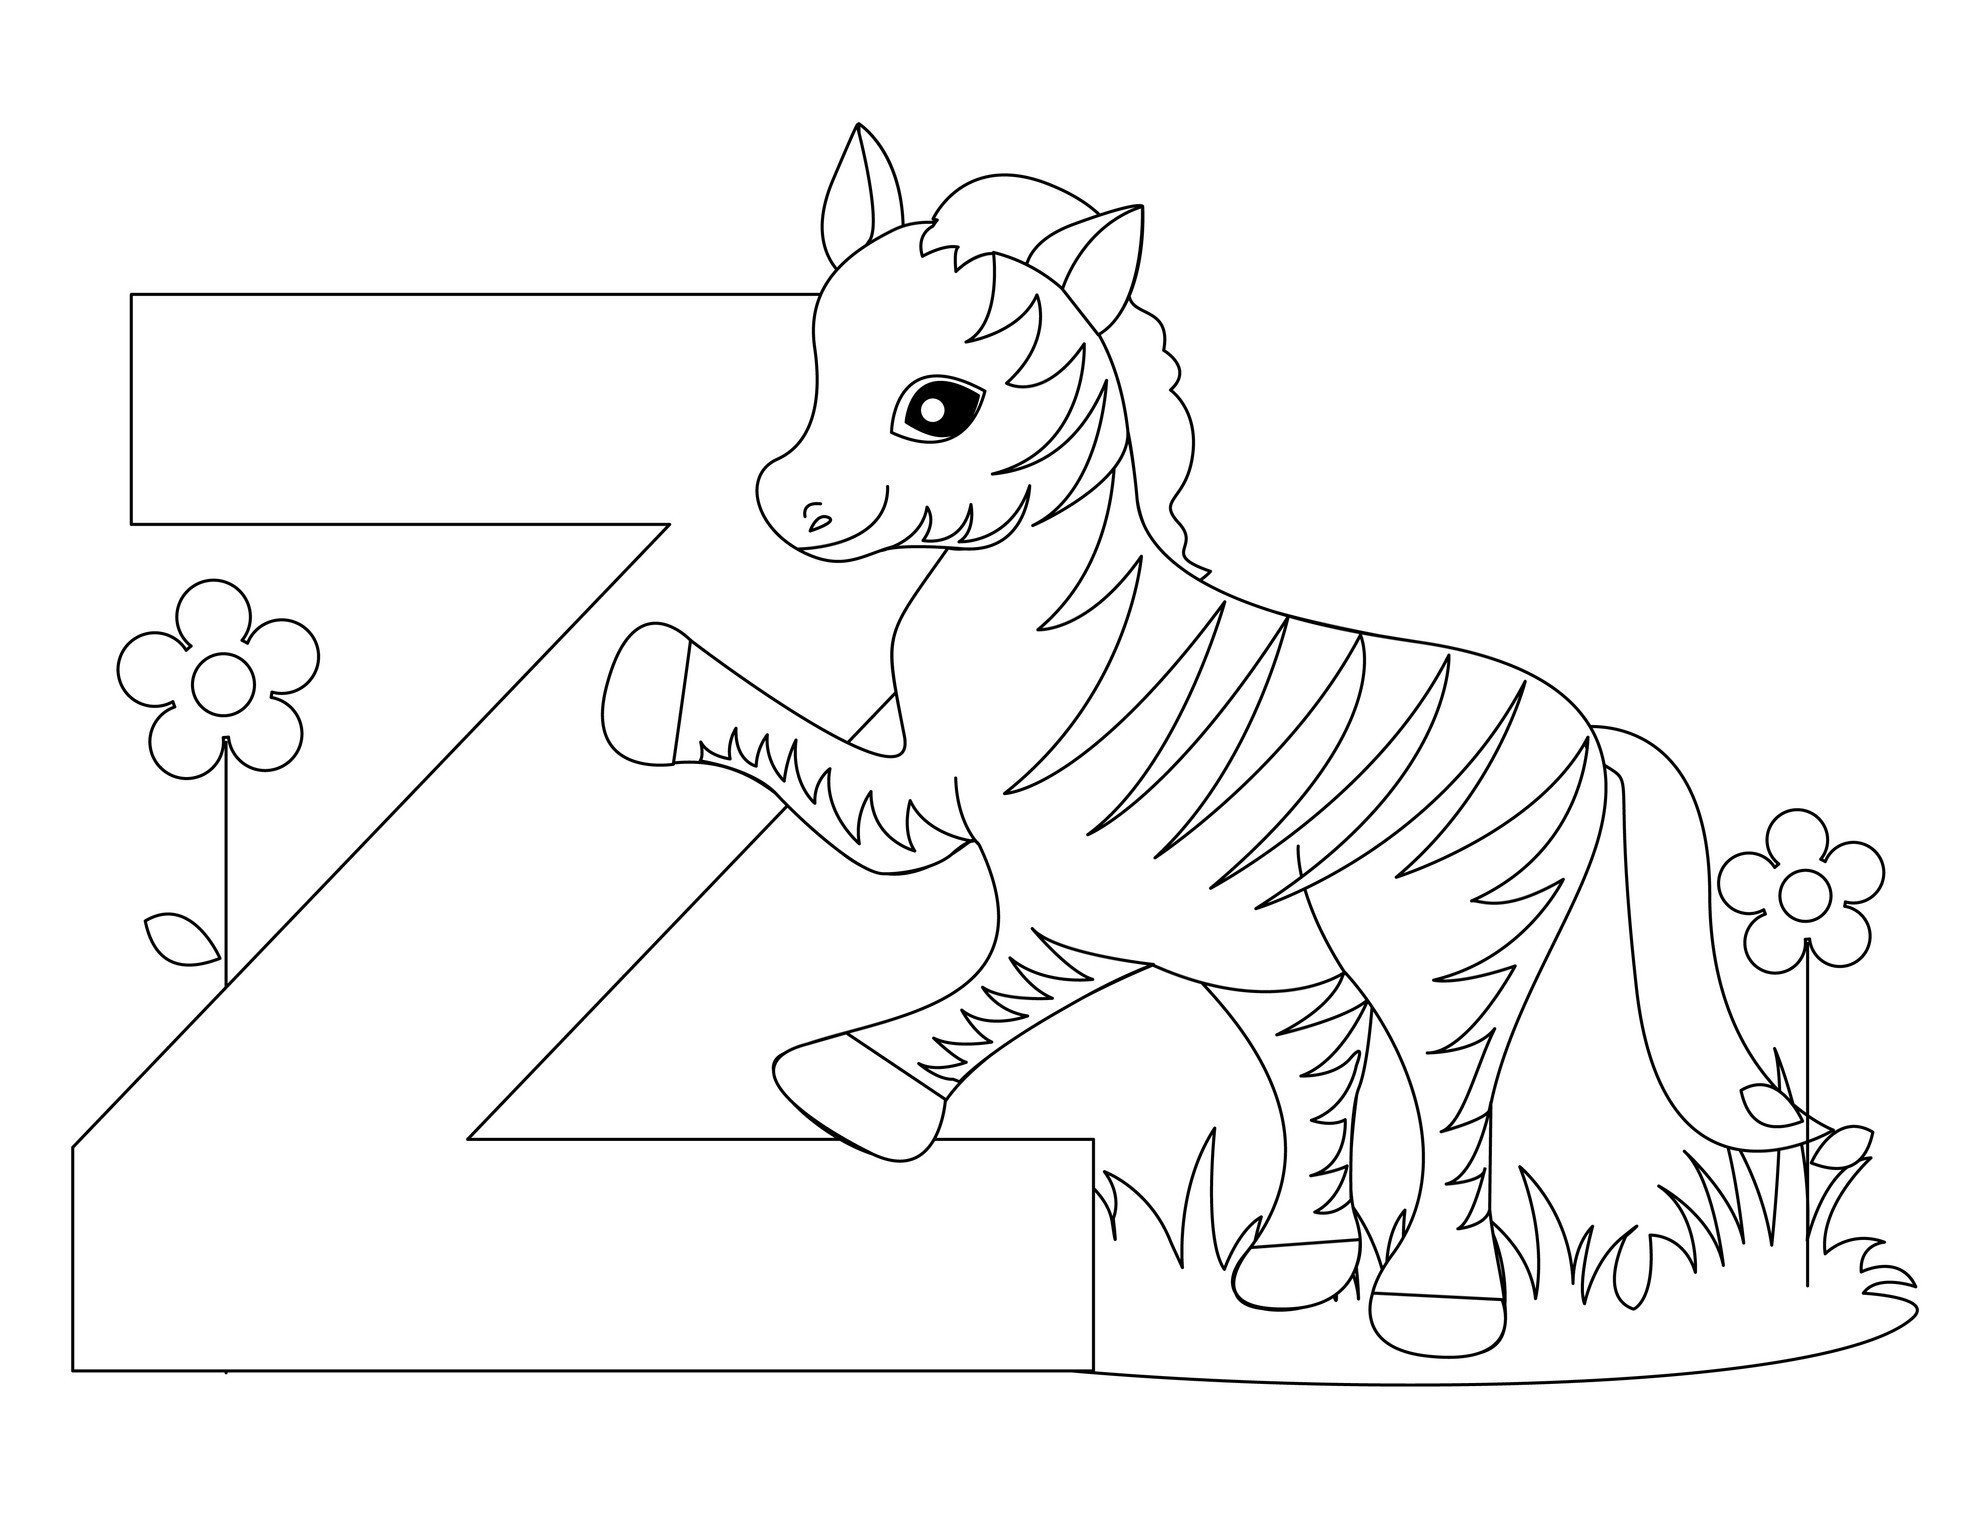  Alphabet Coloring Printable Pages 2